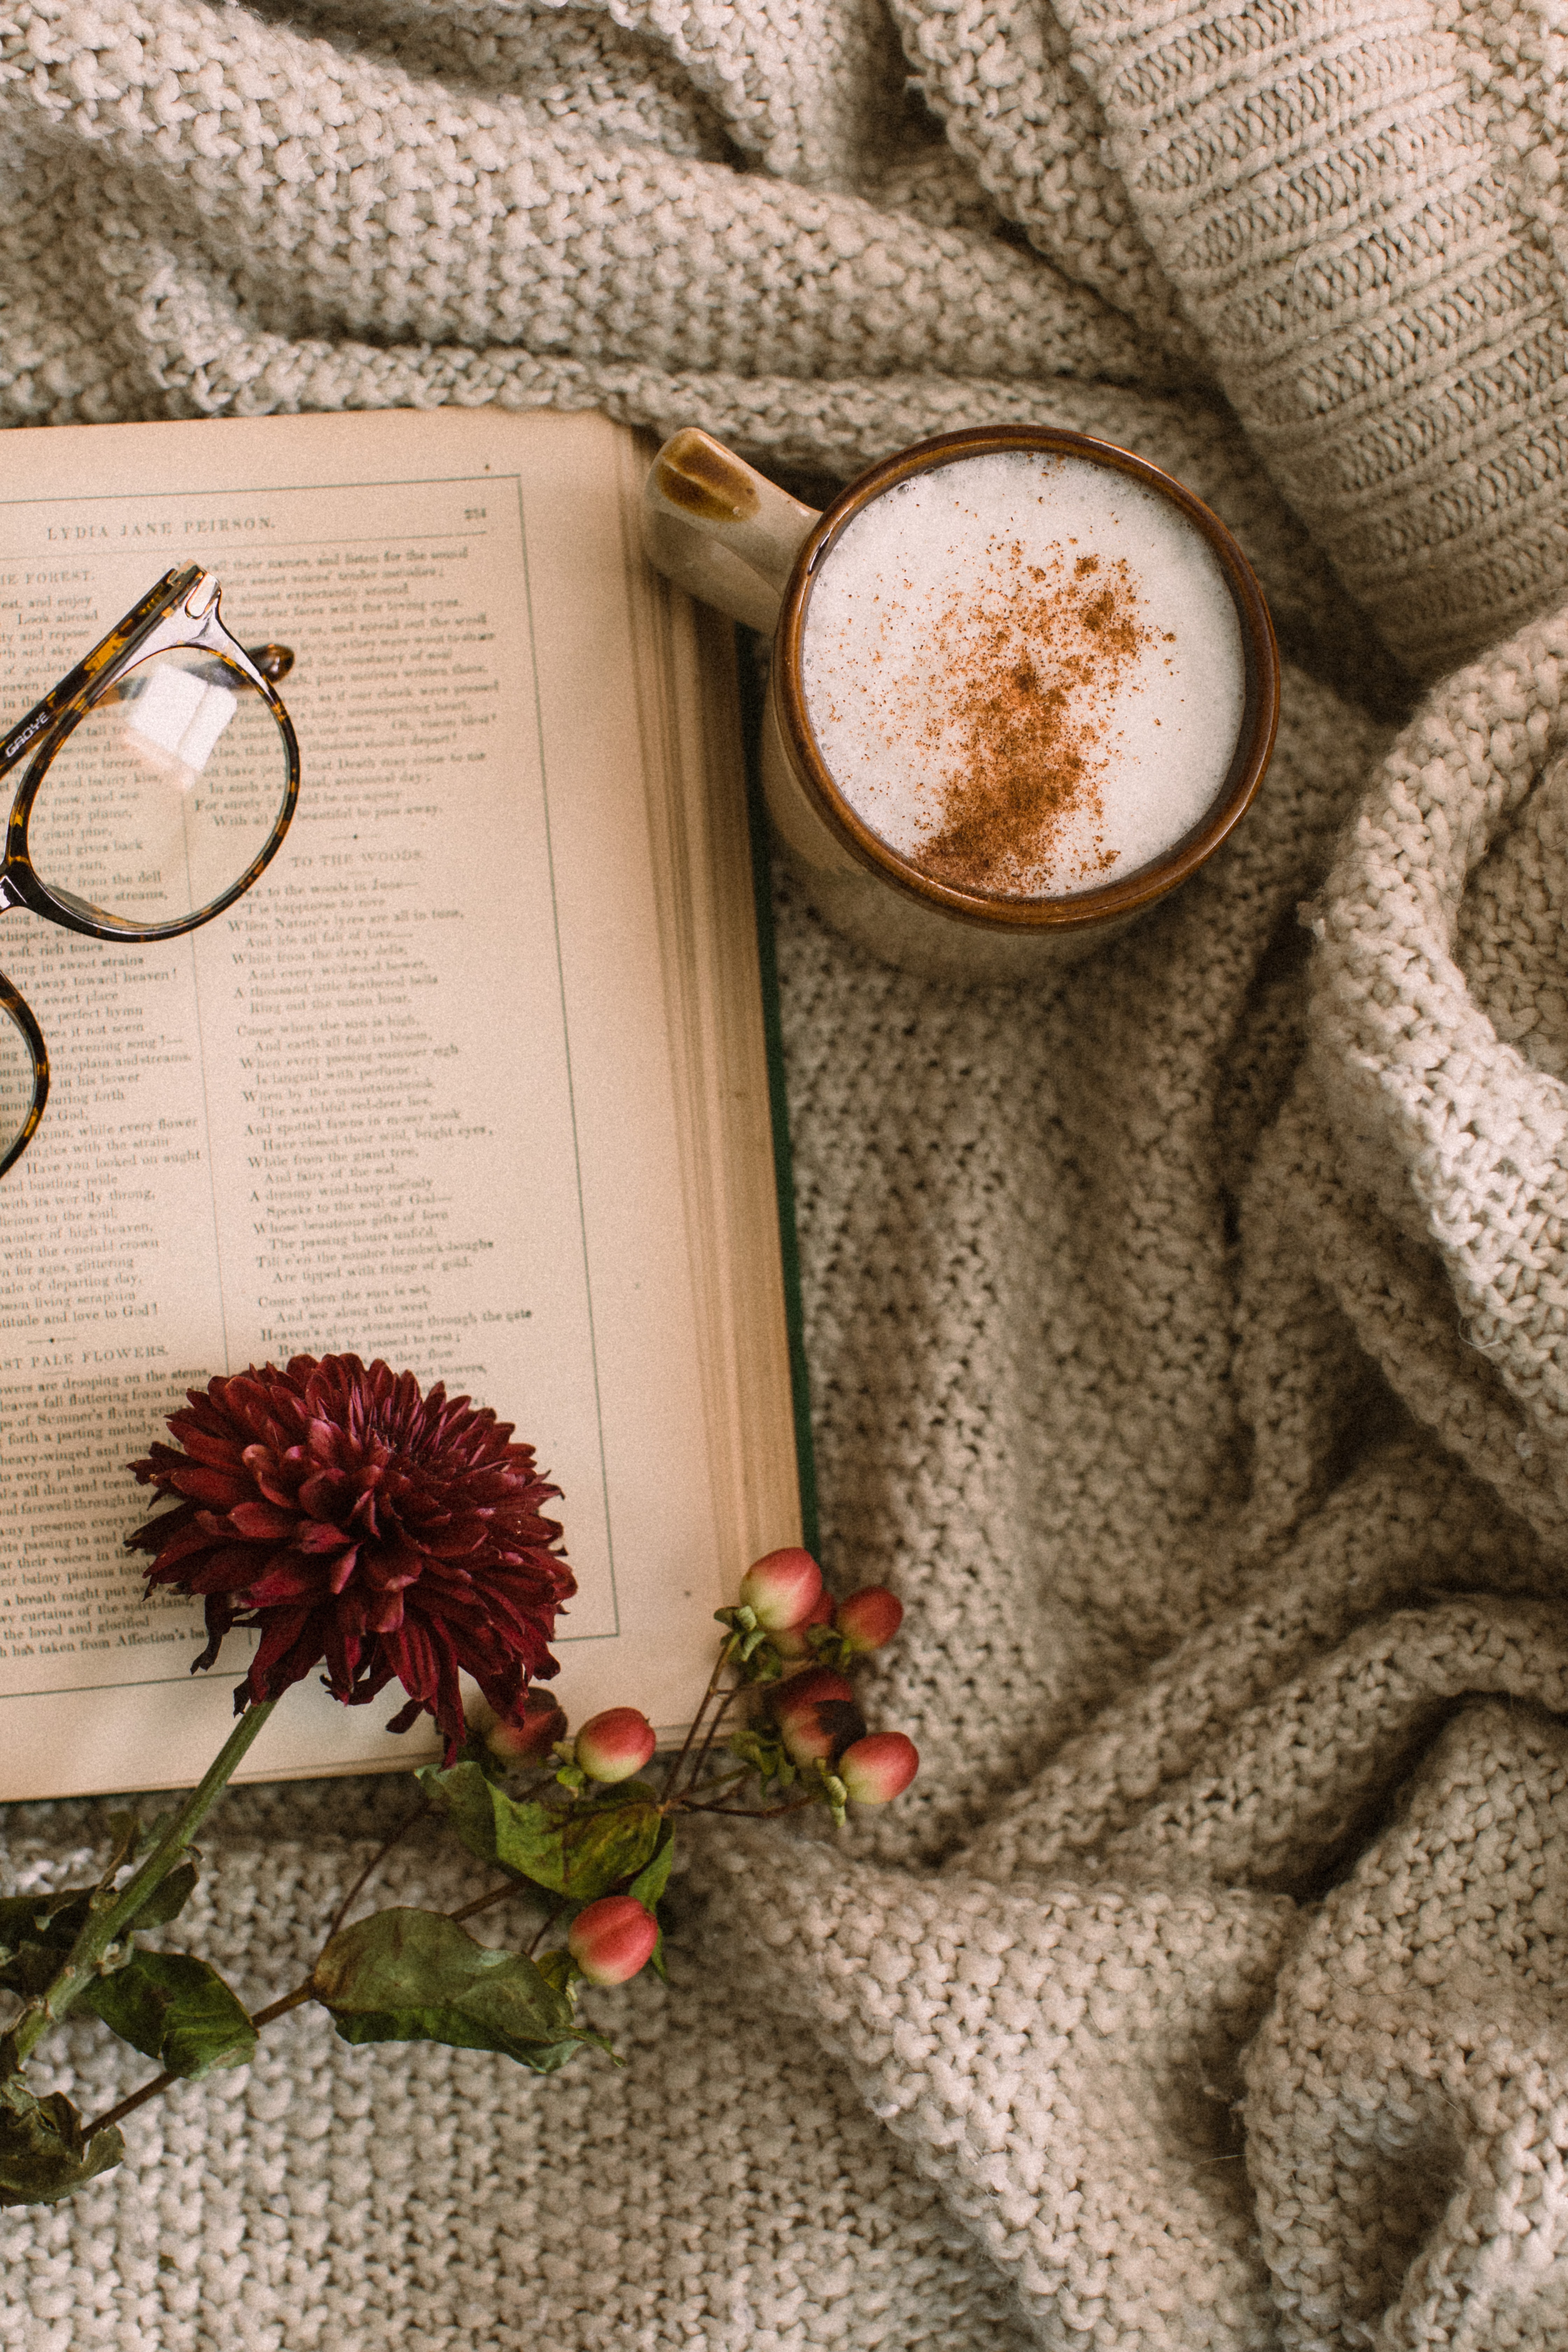 cup, food, book, spectacles, flowers, coffee, cappuccino, glasses, mug UHD